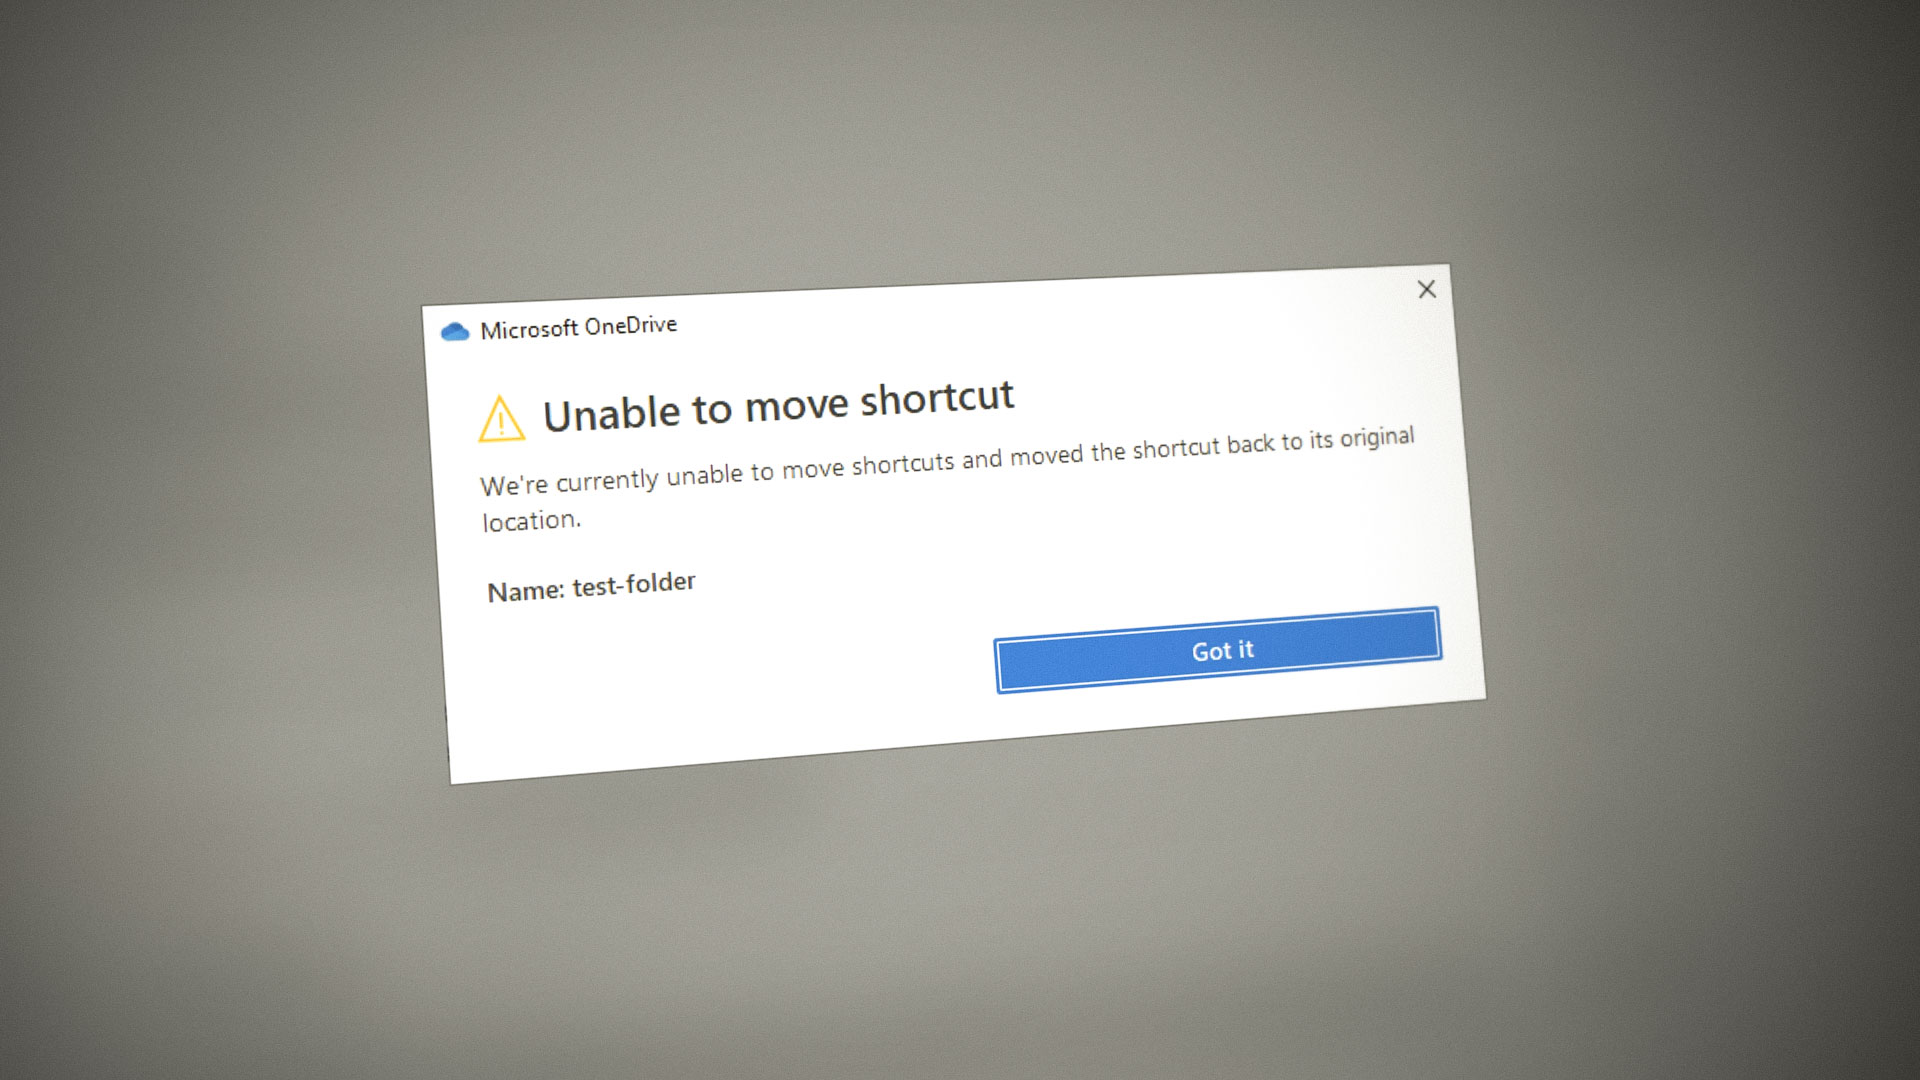 How to Resolve 'Unable to Move Shortcut' in OneDrive?